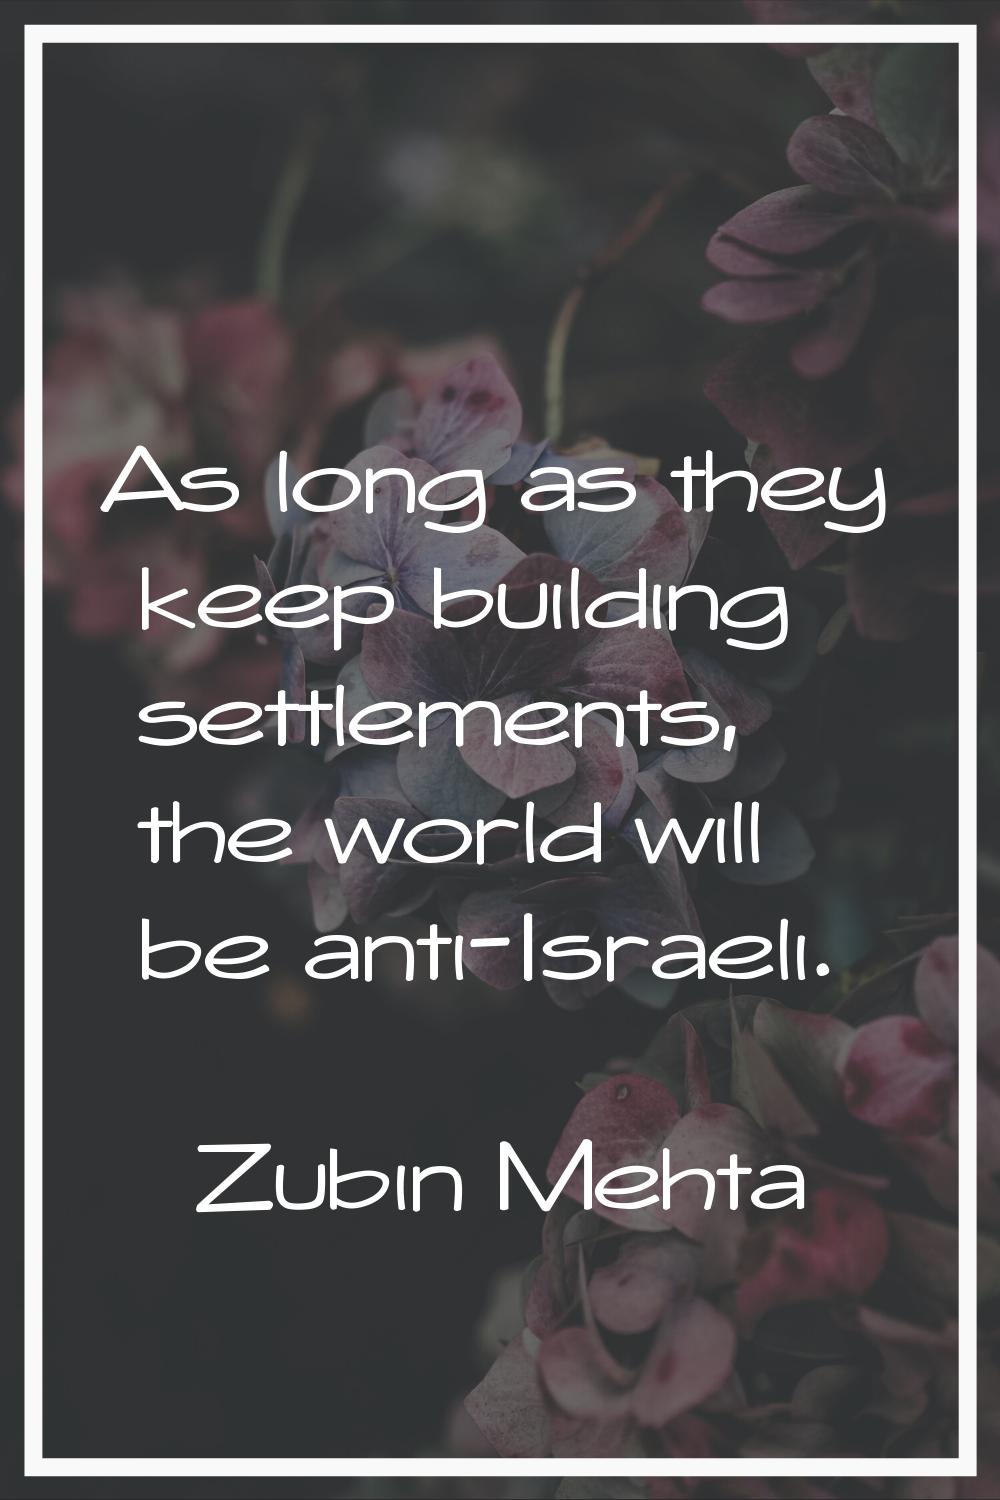 As long as they keep building settlements, the world will be anti-Israeli.